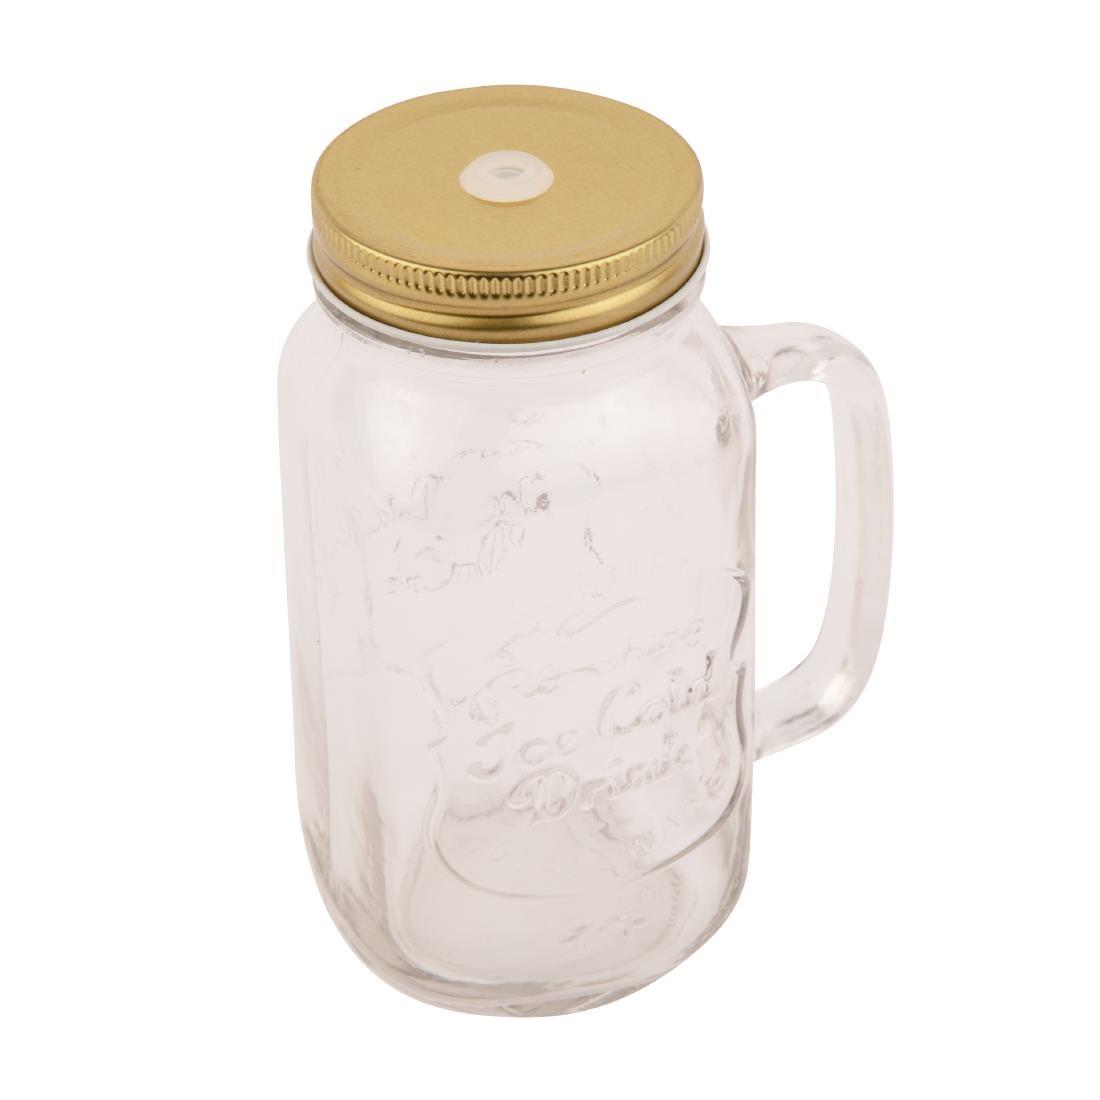 Olympia Mason Jar Lid with Straw Hole (Pack of 12) - CE679  - 4